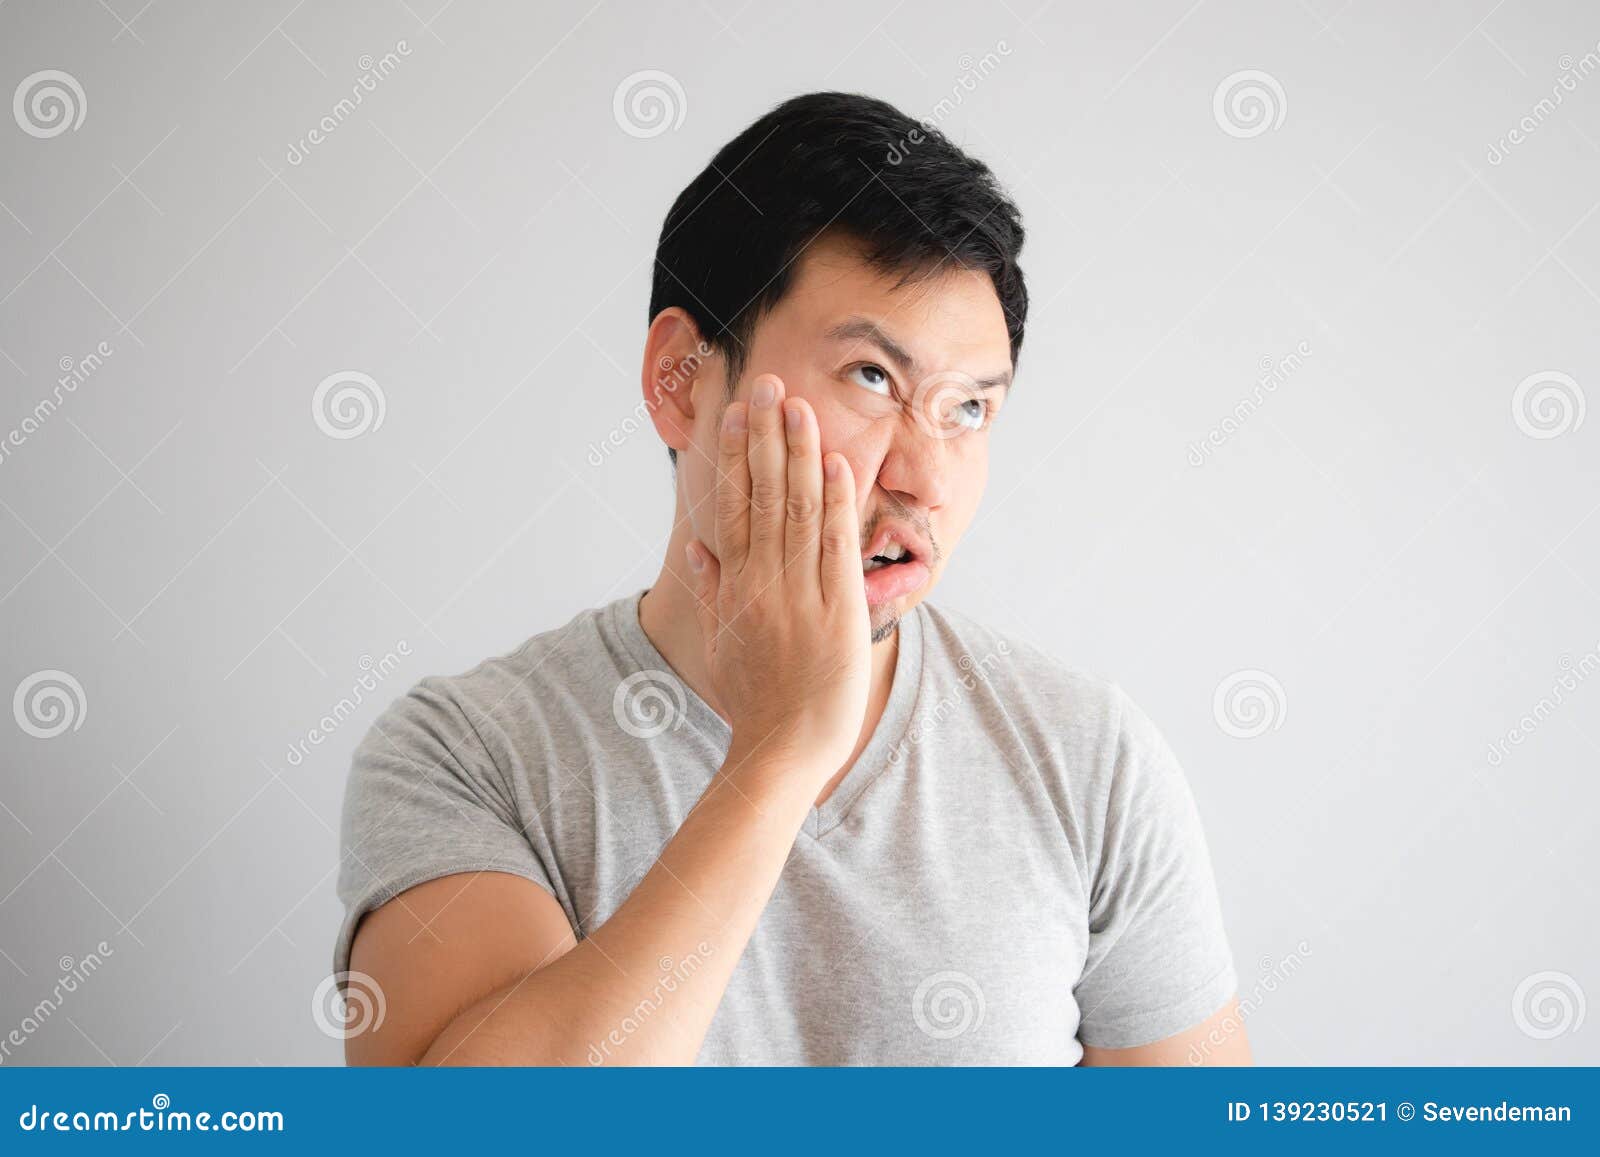 Funny Face of Angry Man Punish Himself by Hit on His Own Face Stock Image -  Image of conflict, negative: 139230521